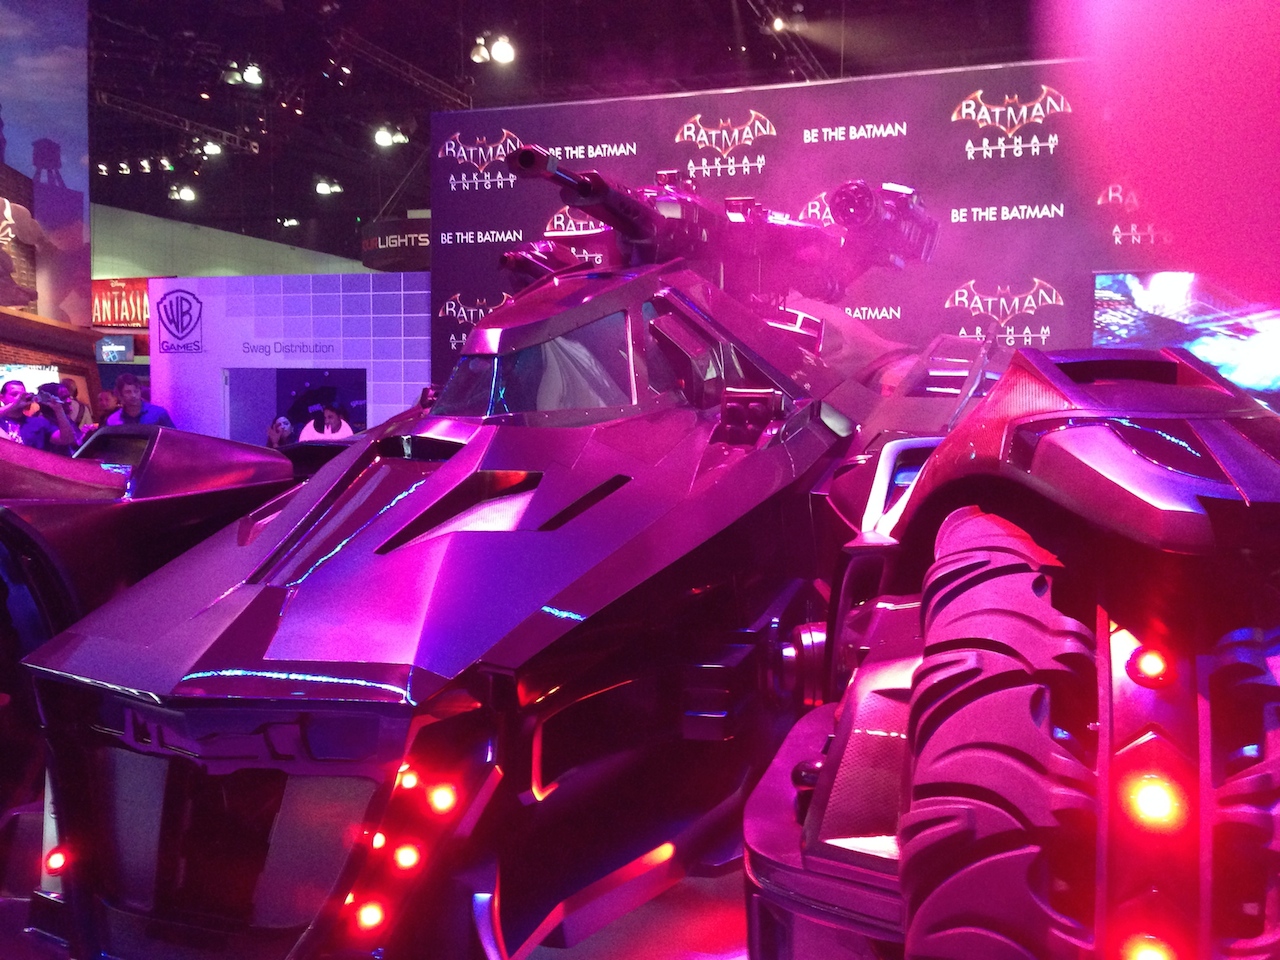 They Brought A Batmobile To E3